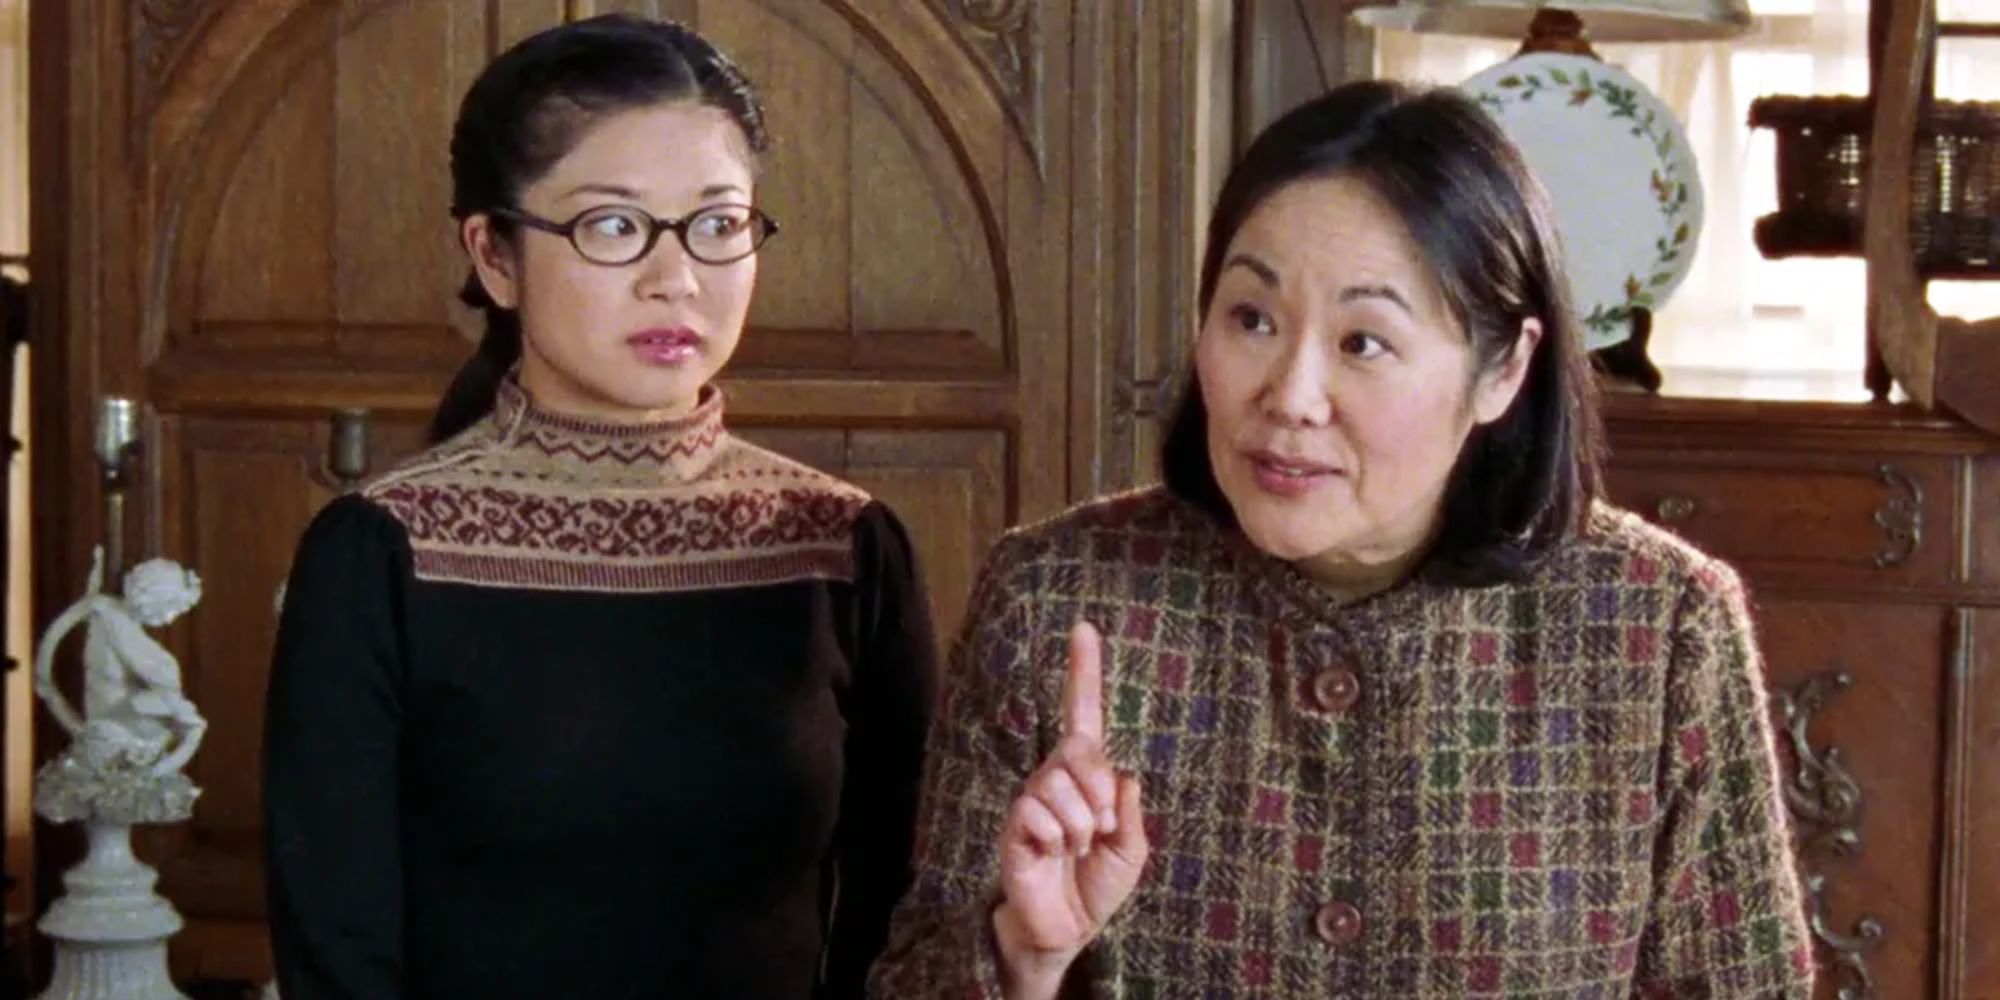 10 TV Shows With Witty Dialogue That We Just Can't Get Enough Of